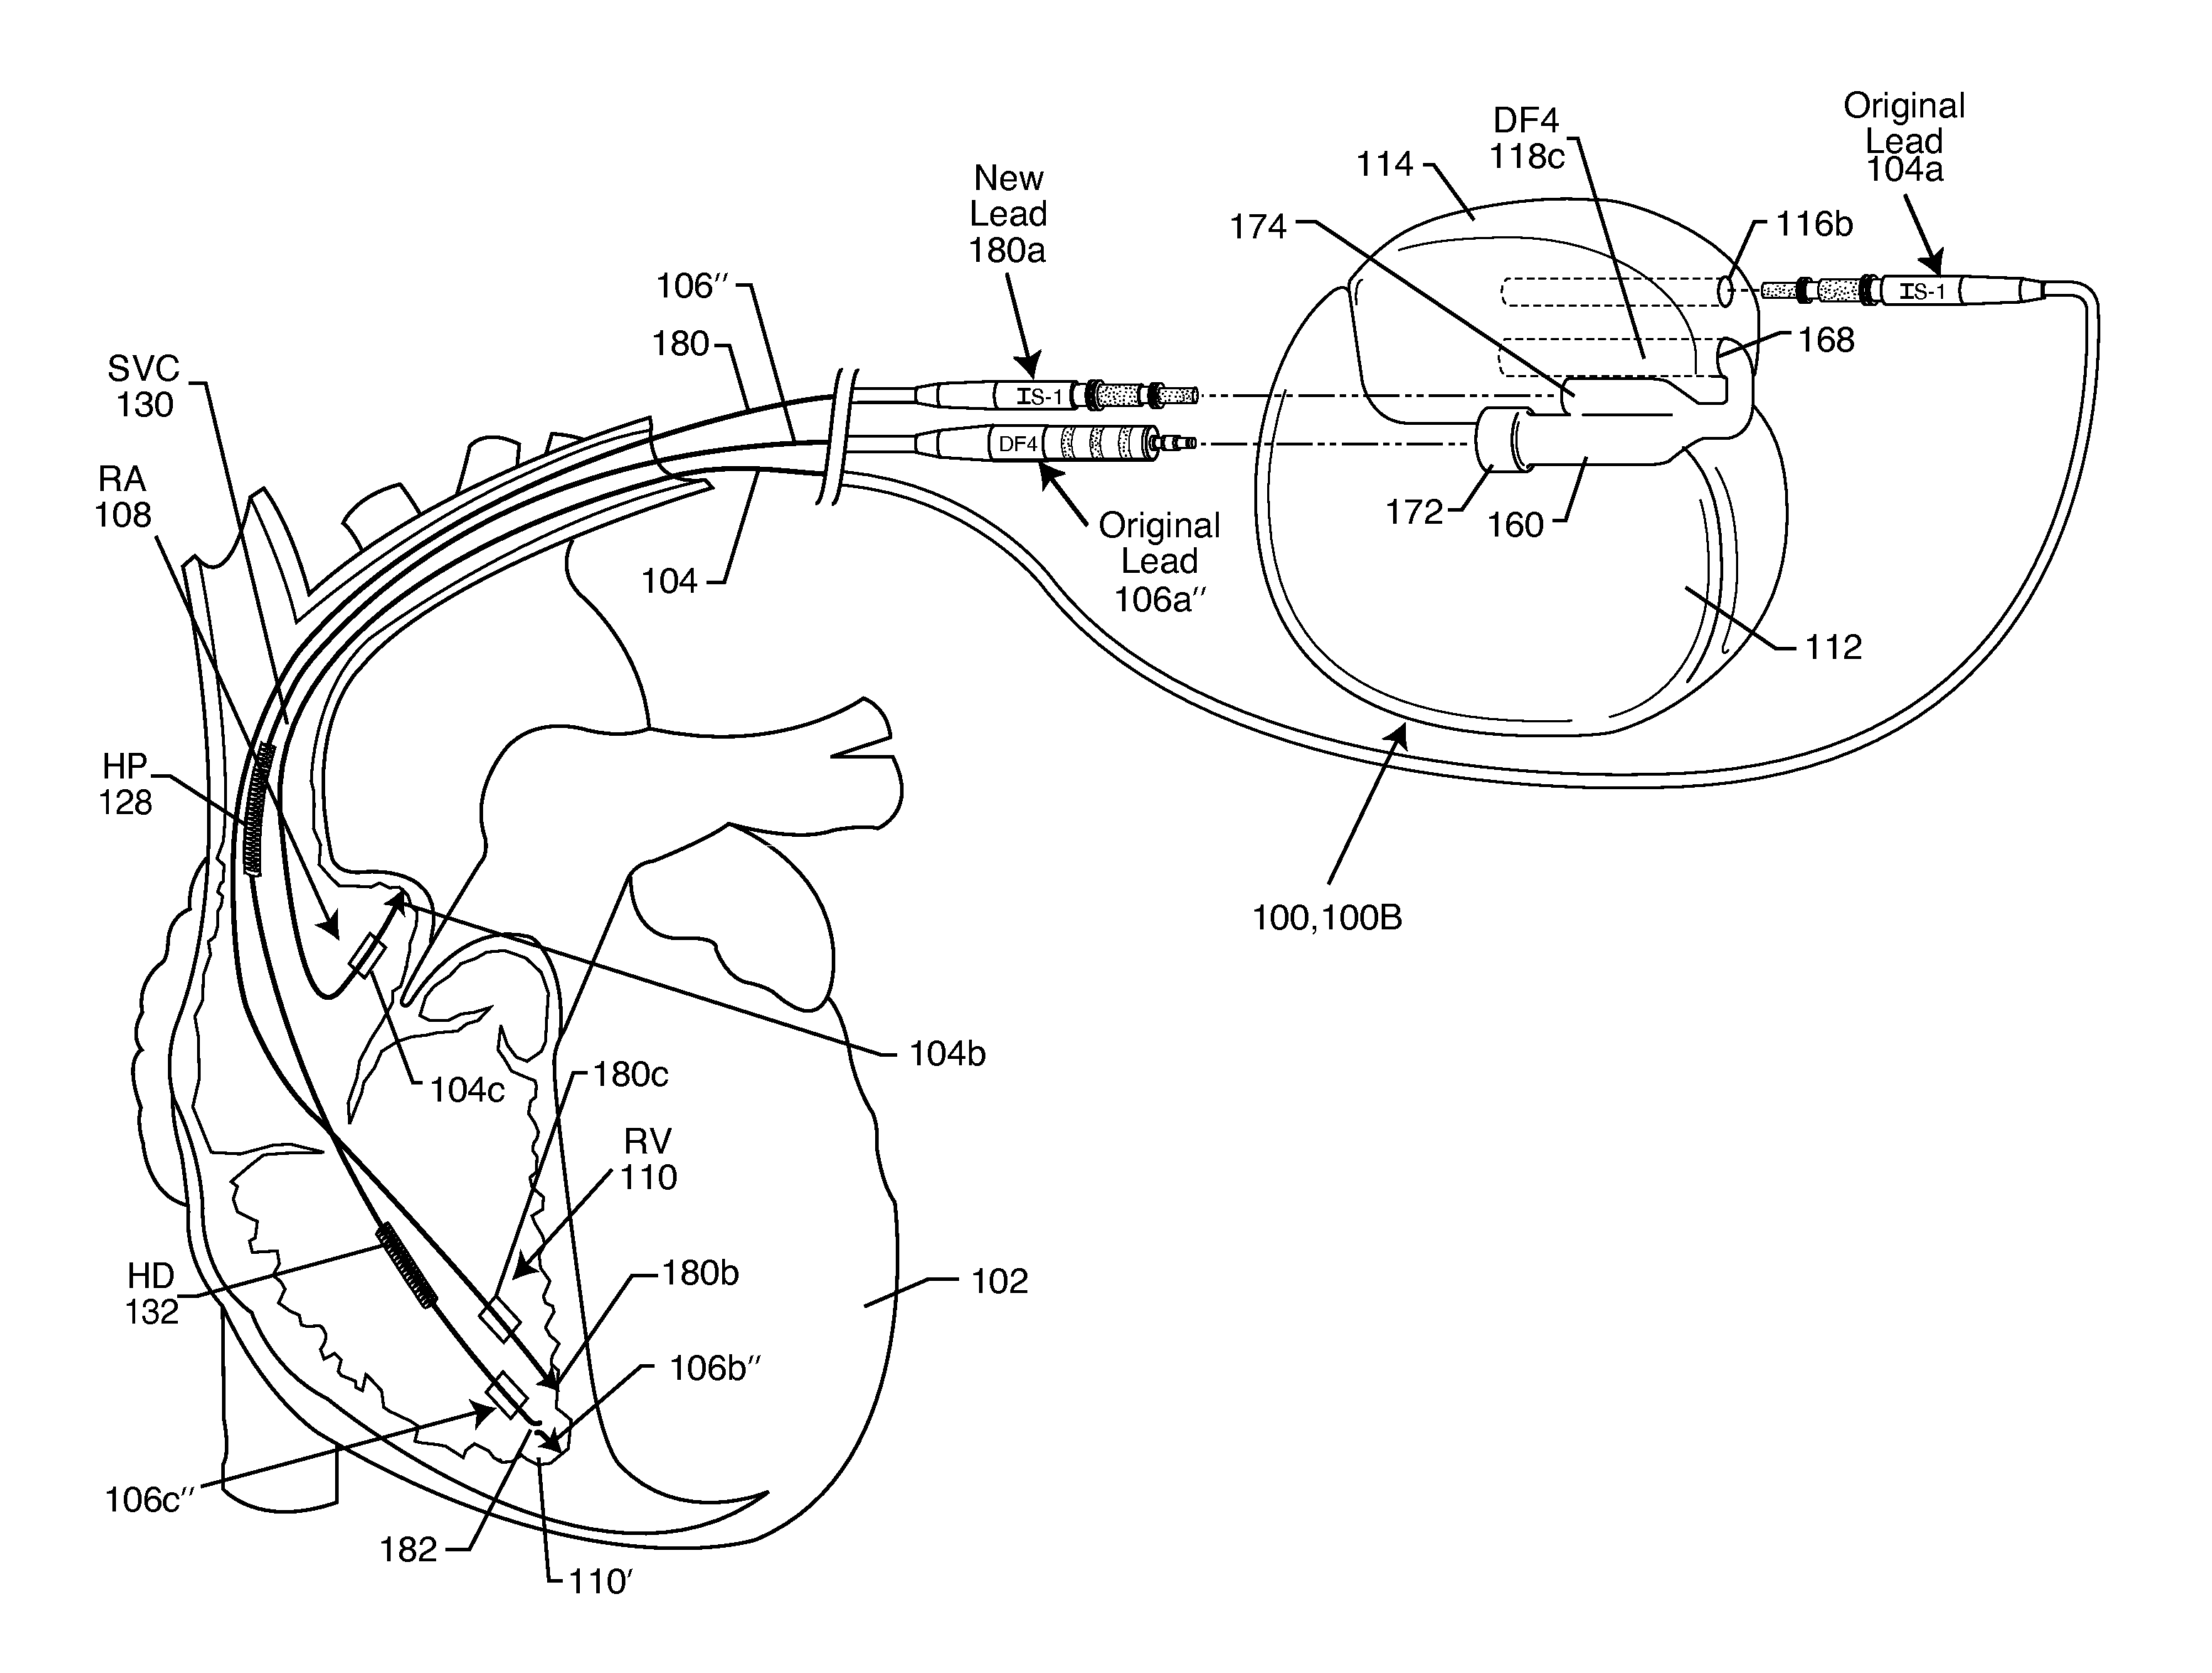 Secondary header for an implantable medical device incorporating an ISO DF4 connector and connector cavity and/or an IS4 connector and connector cavity